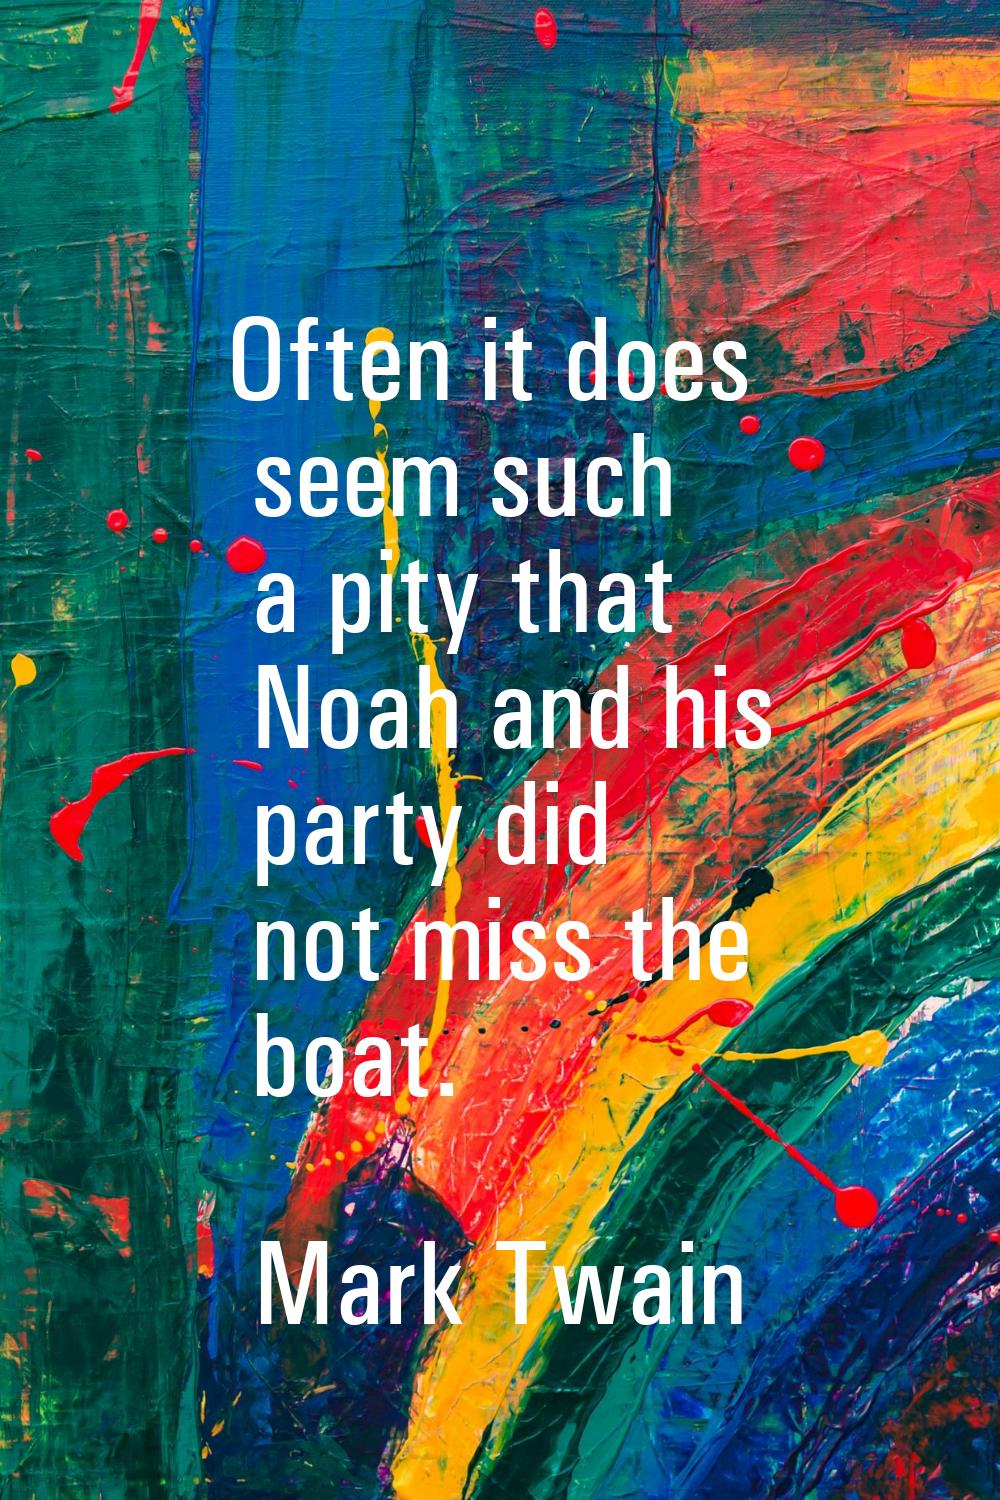 Often it does seem such a pity that Noah and his party did not miss the boat.